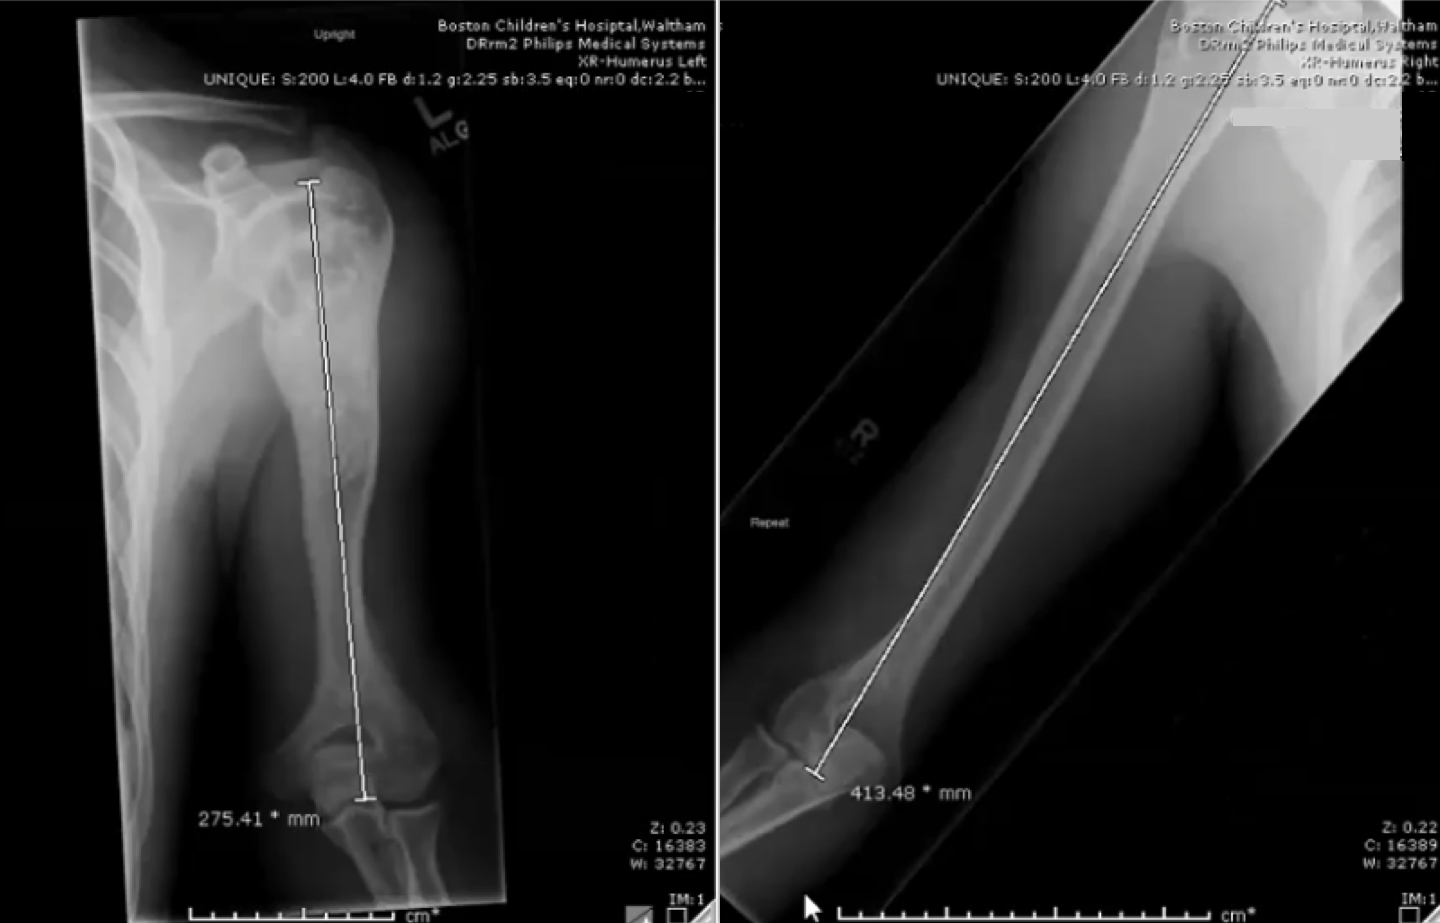 In February 2019 an 18-year-old patient had a 138-millimeter length difference between his left (left) and right (right) arms.